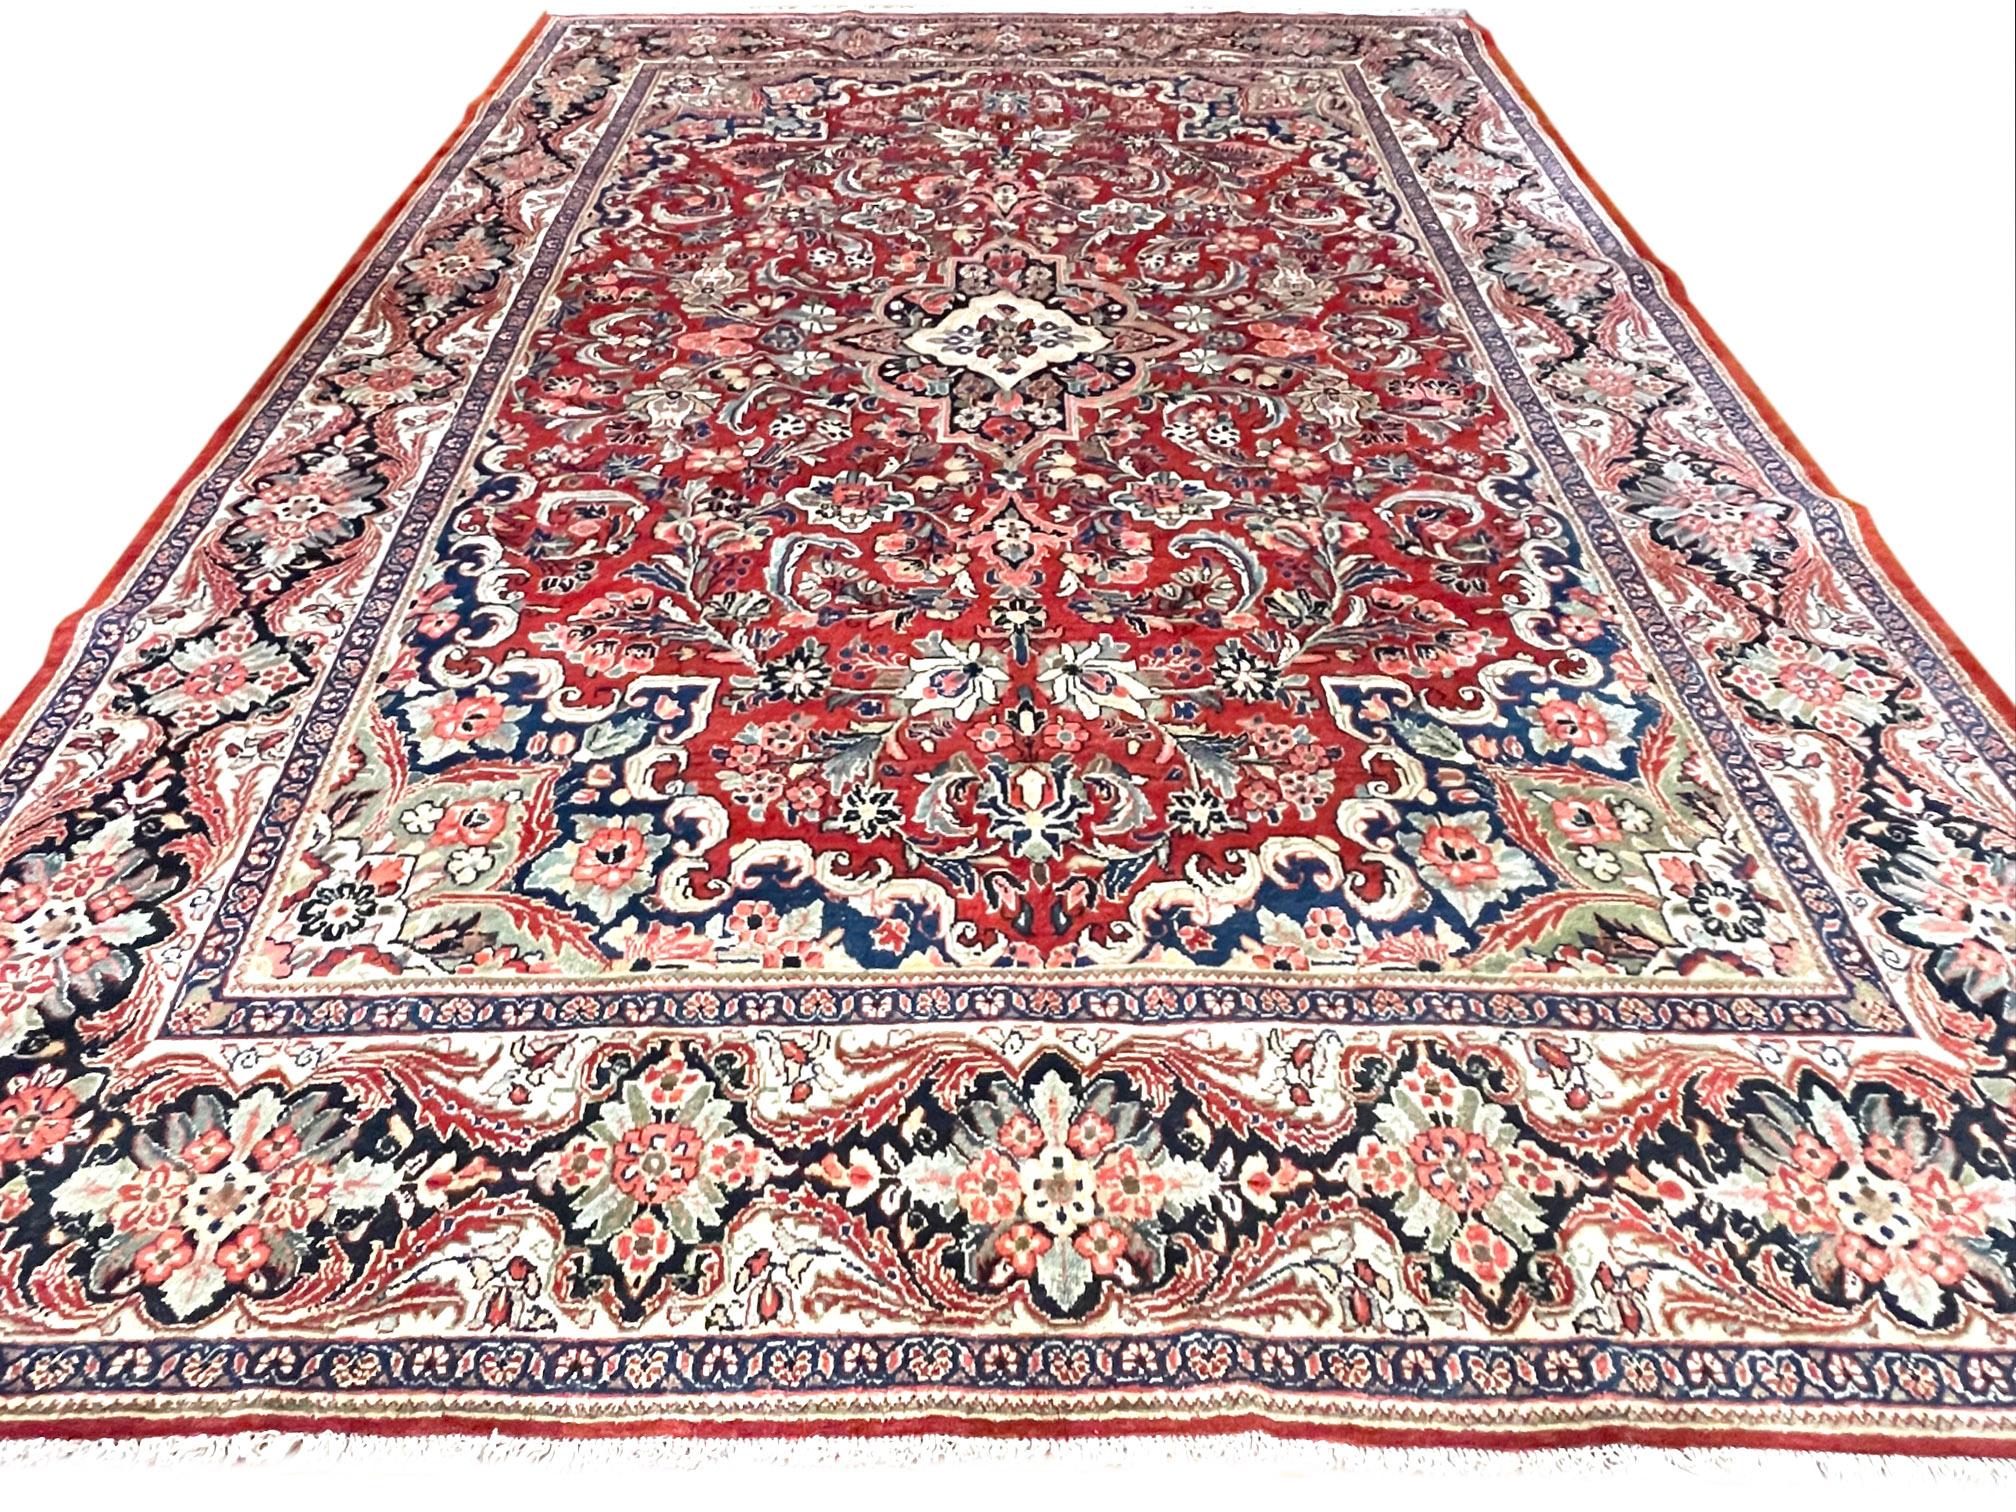 This rug is an authentic hand knotted Sarouk rug with wool pile and cotton foundation. A Sarouk or Sarough rug is a type of Persian rug from Markazi Province in Iran and they are among fine selections among Persian rug market. The design is this